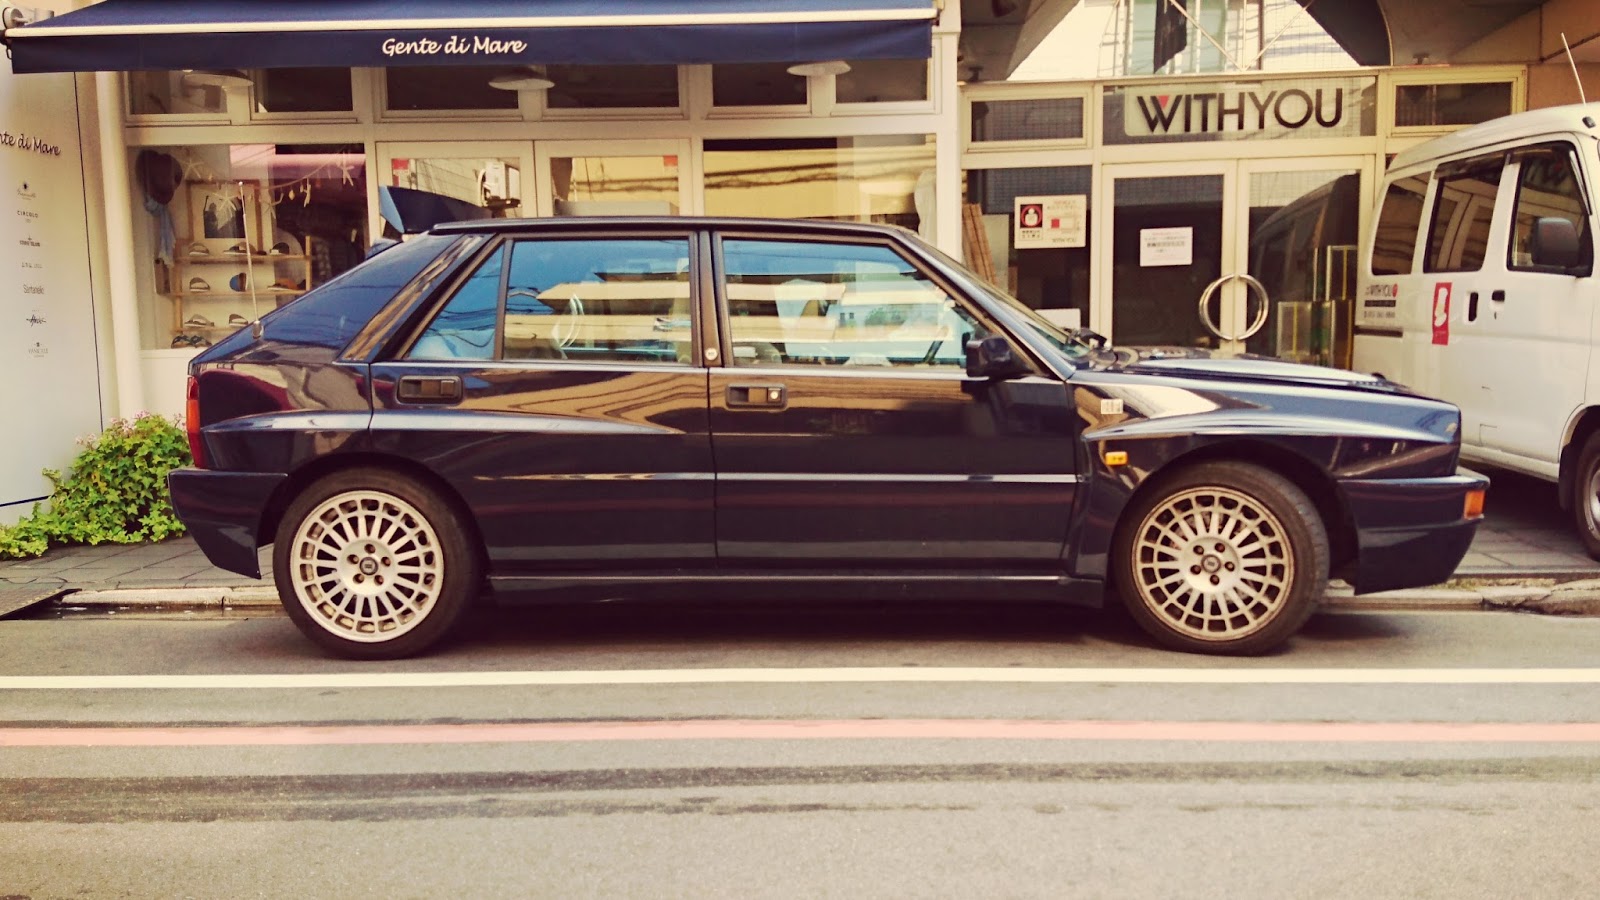 Spotted in the Street: Lancia